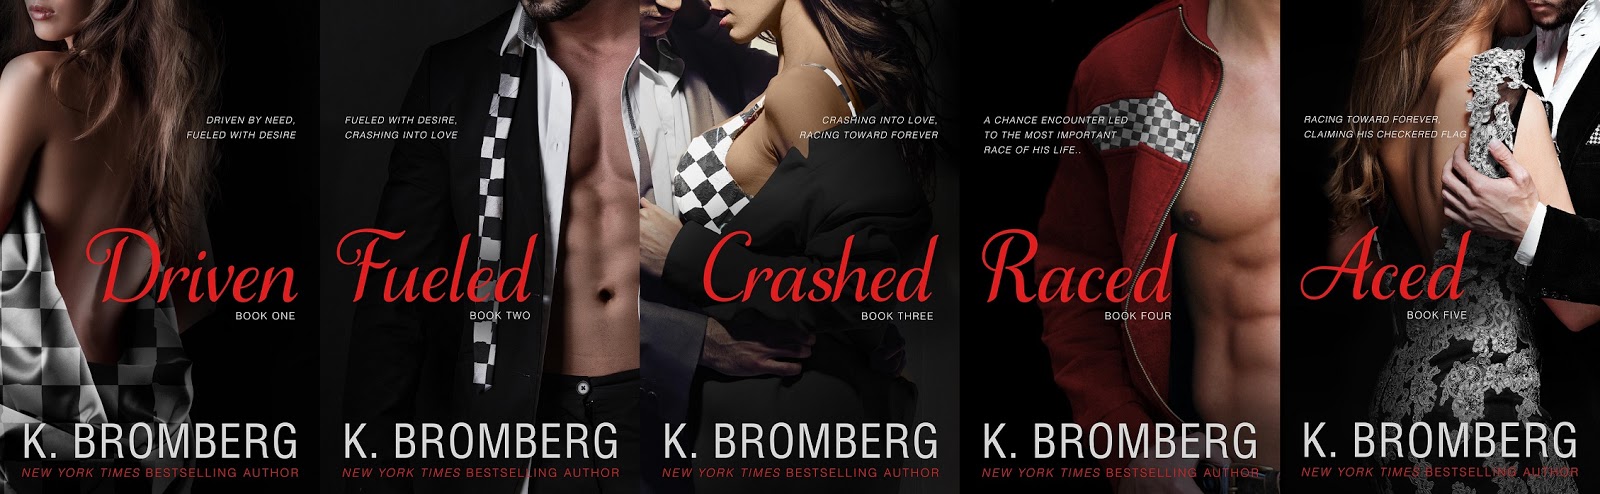 Check out the NEW SEXY COVERS in the Driven Series by K. Bromberg! 